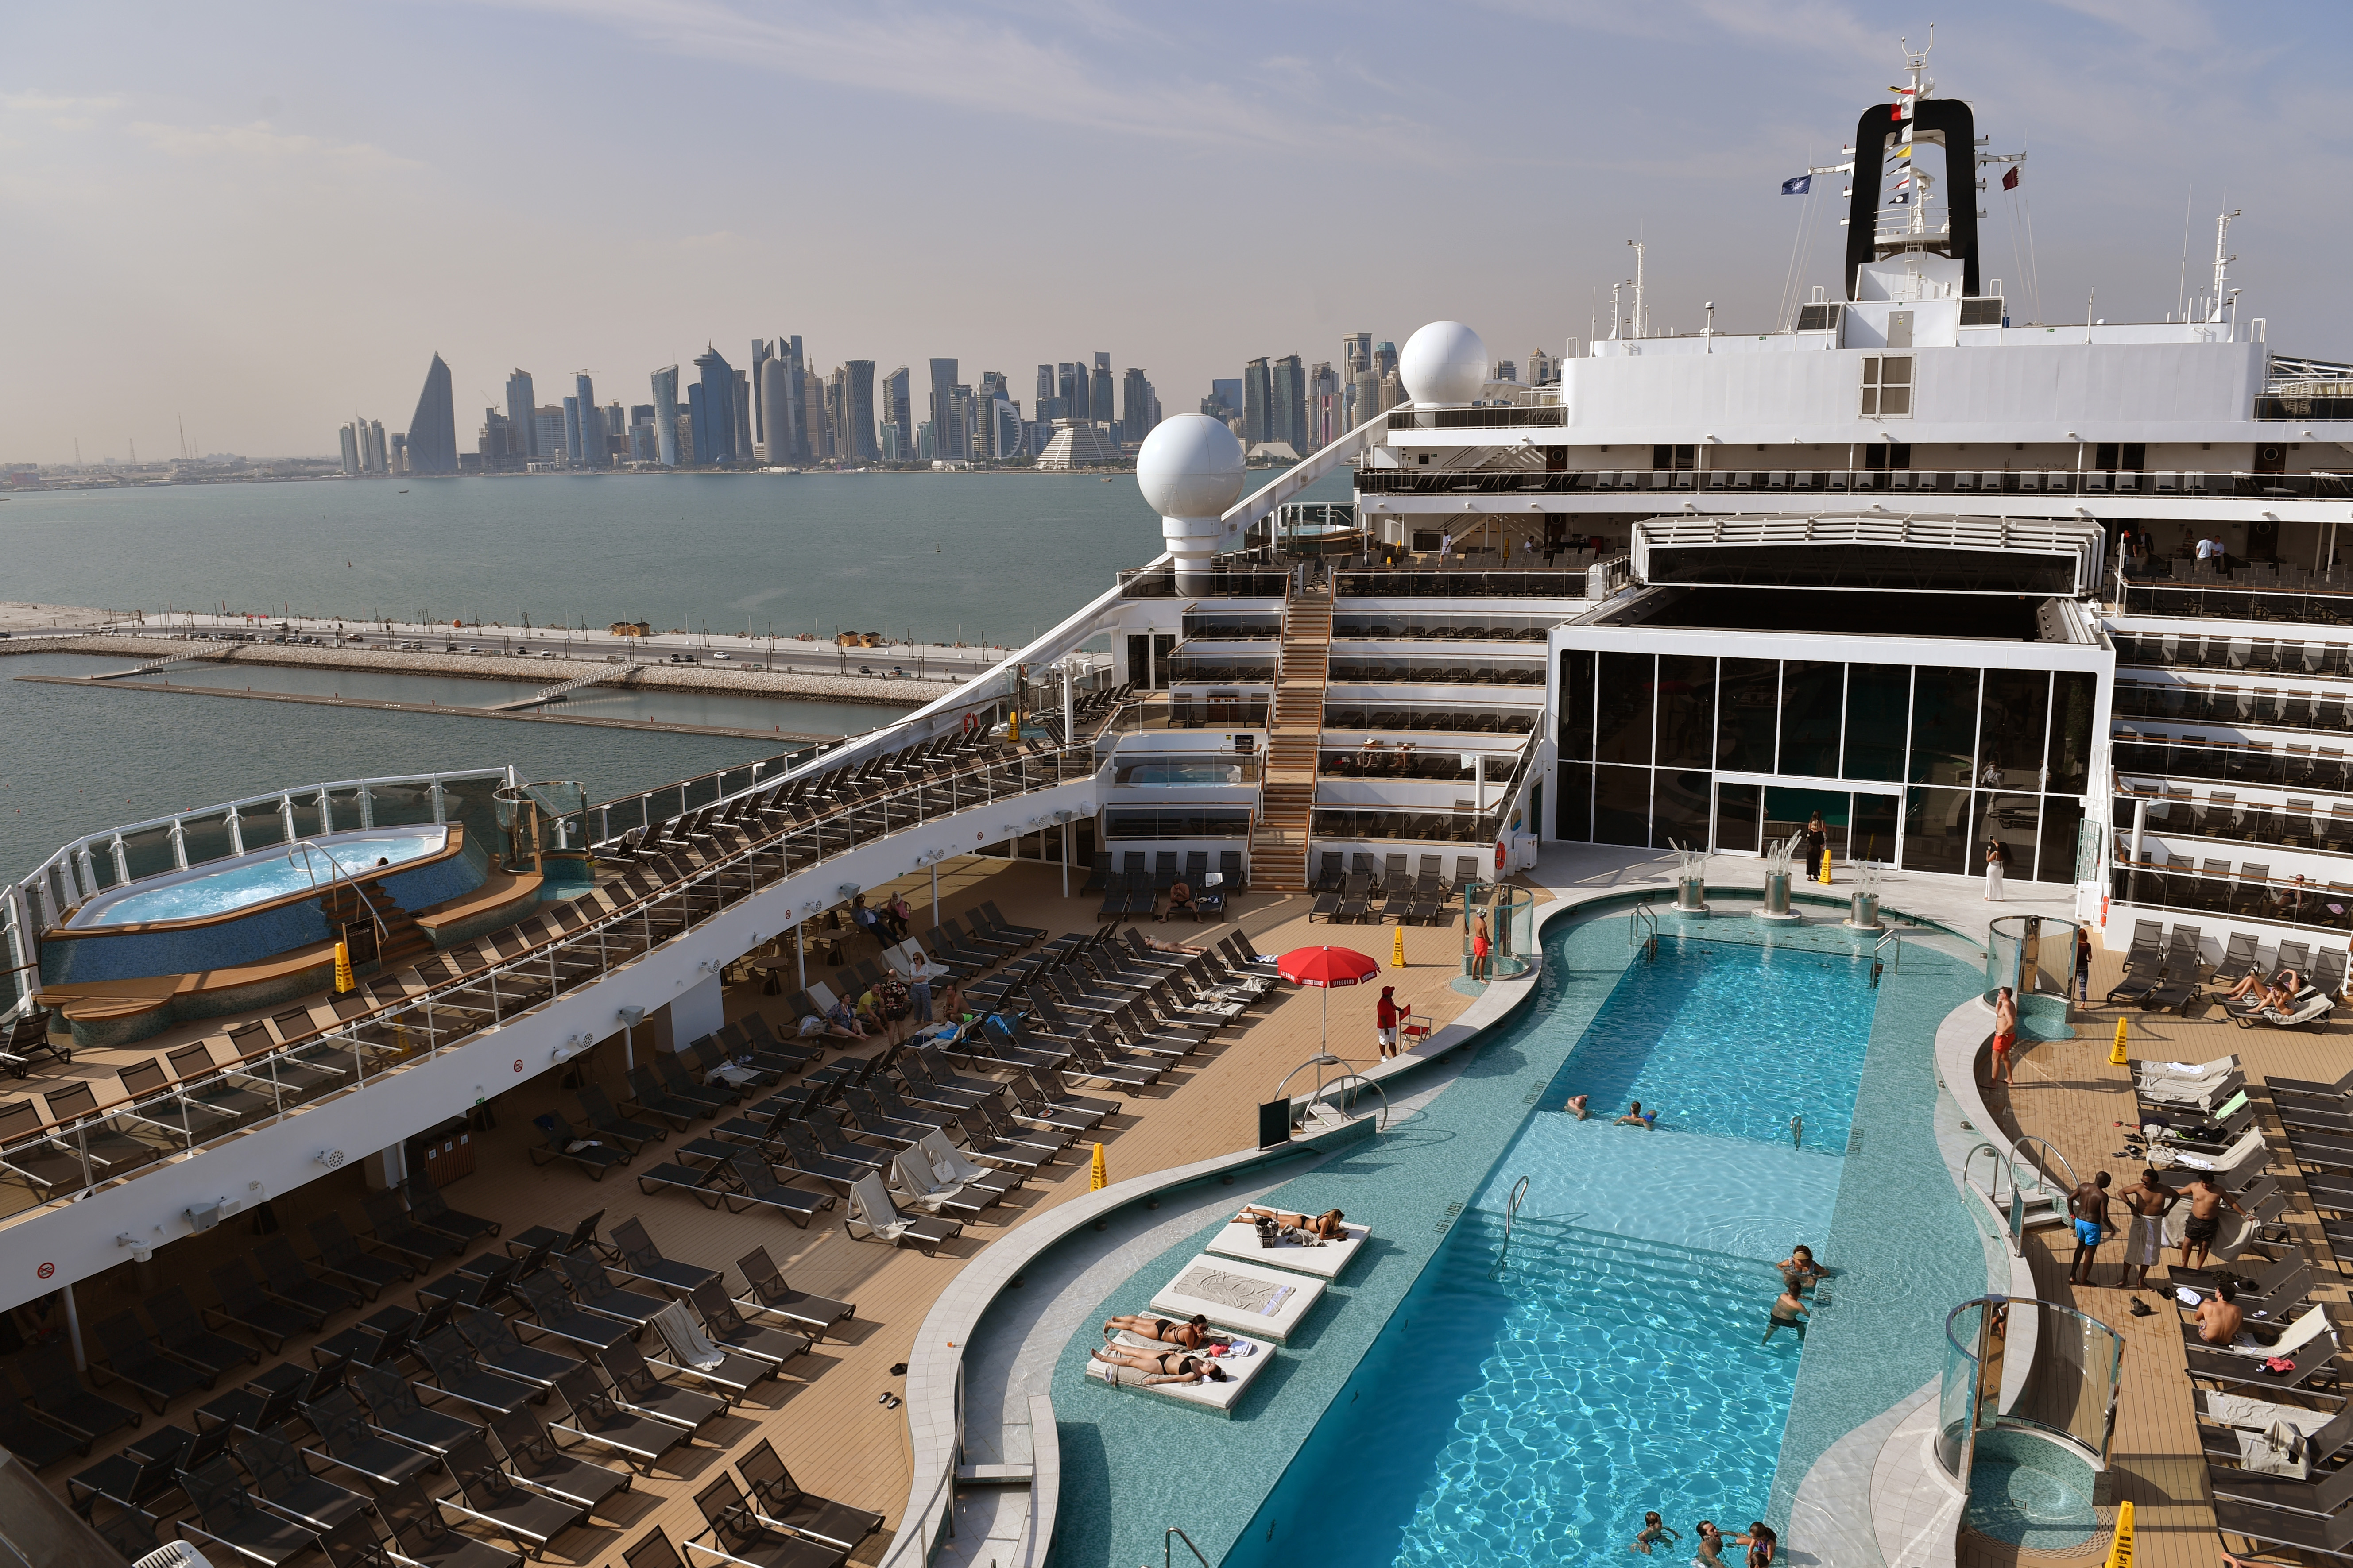 MSC Cruises offers cruises to locations all over the world, such as the Caribbean, South America, Asia, the Mediterranean, Northern Europe, and the Middle East